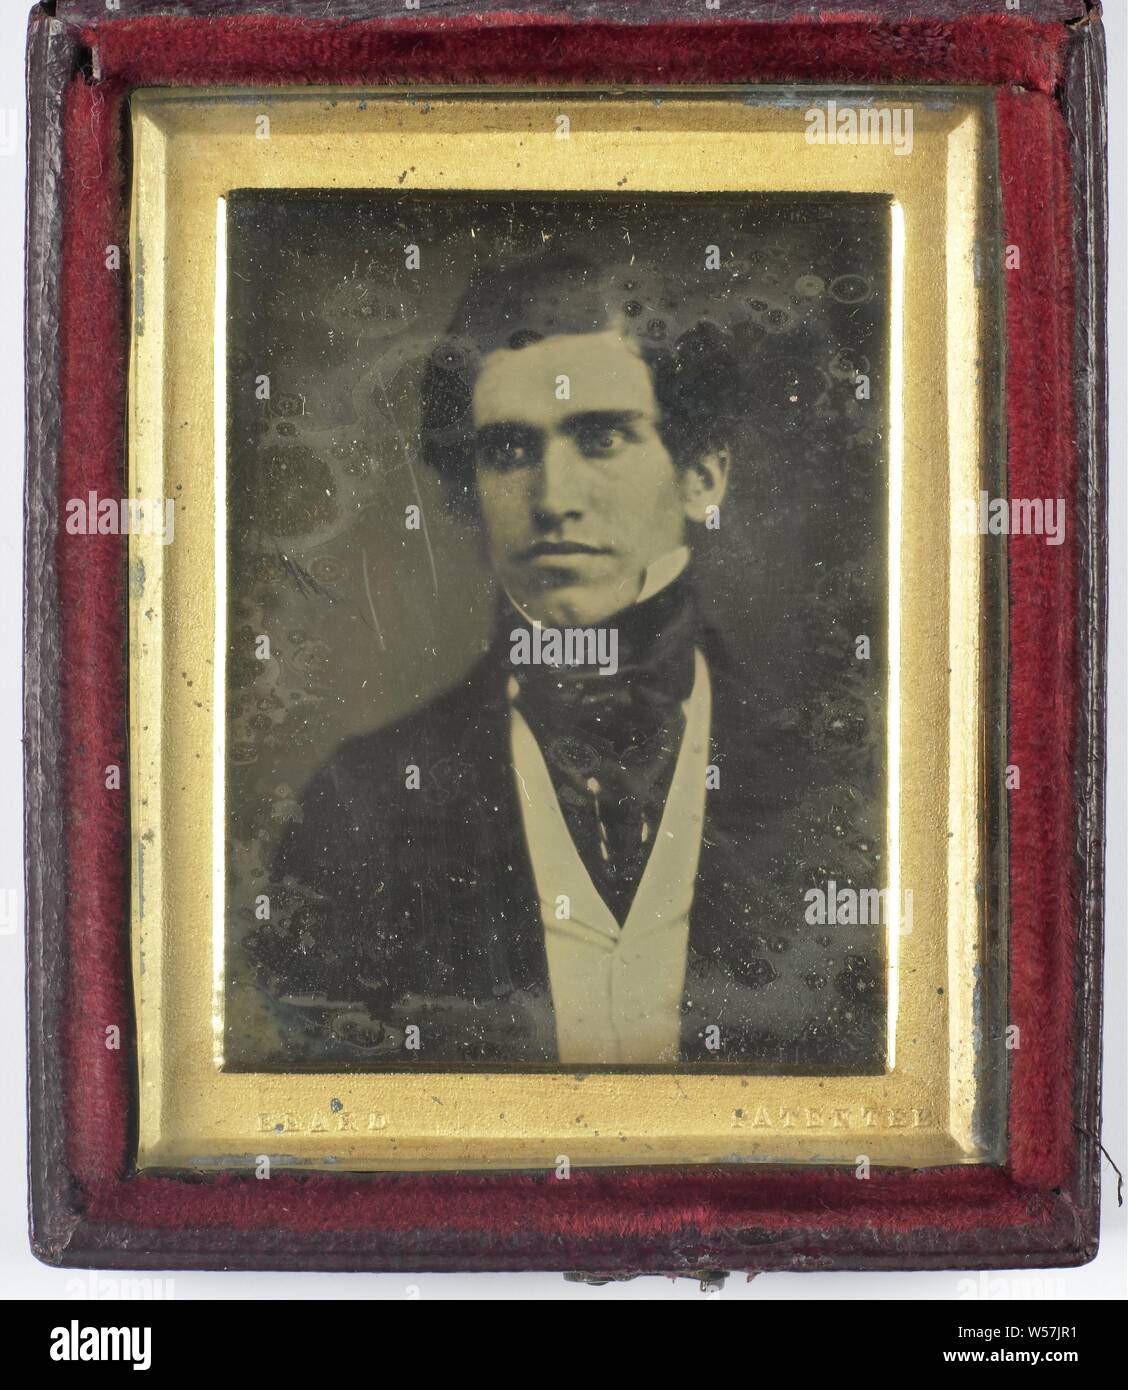 Portrait of an unknown young man, possibly Henry Webster Blackburn, historical persons, adult man, Henry Webster Blackburn, Richard Beard, 1841 - 1850, copper (metal), glass, leather, velvet (fabric weave), h 50 mm × w 38 mm h 60 mm × w 74 mm × t 15 mm Stock Photo